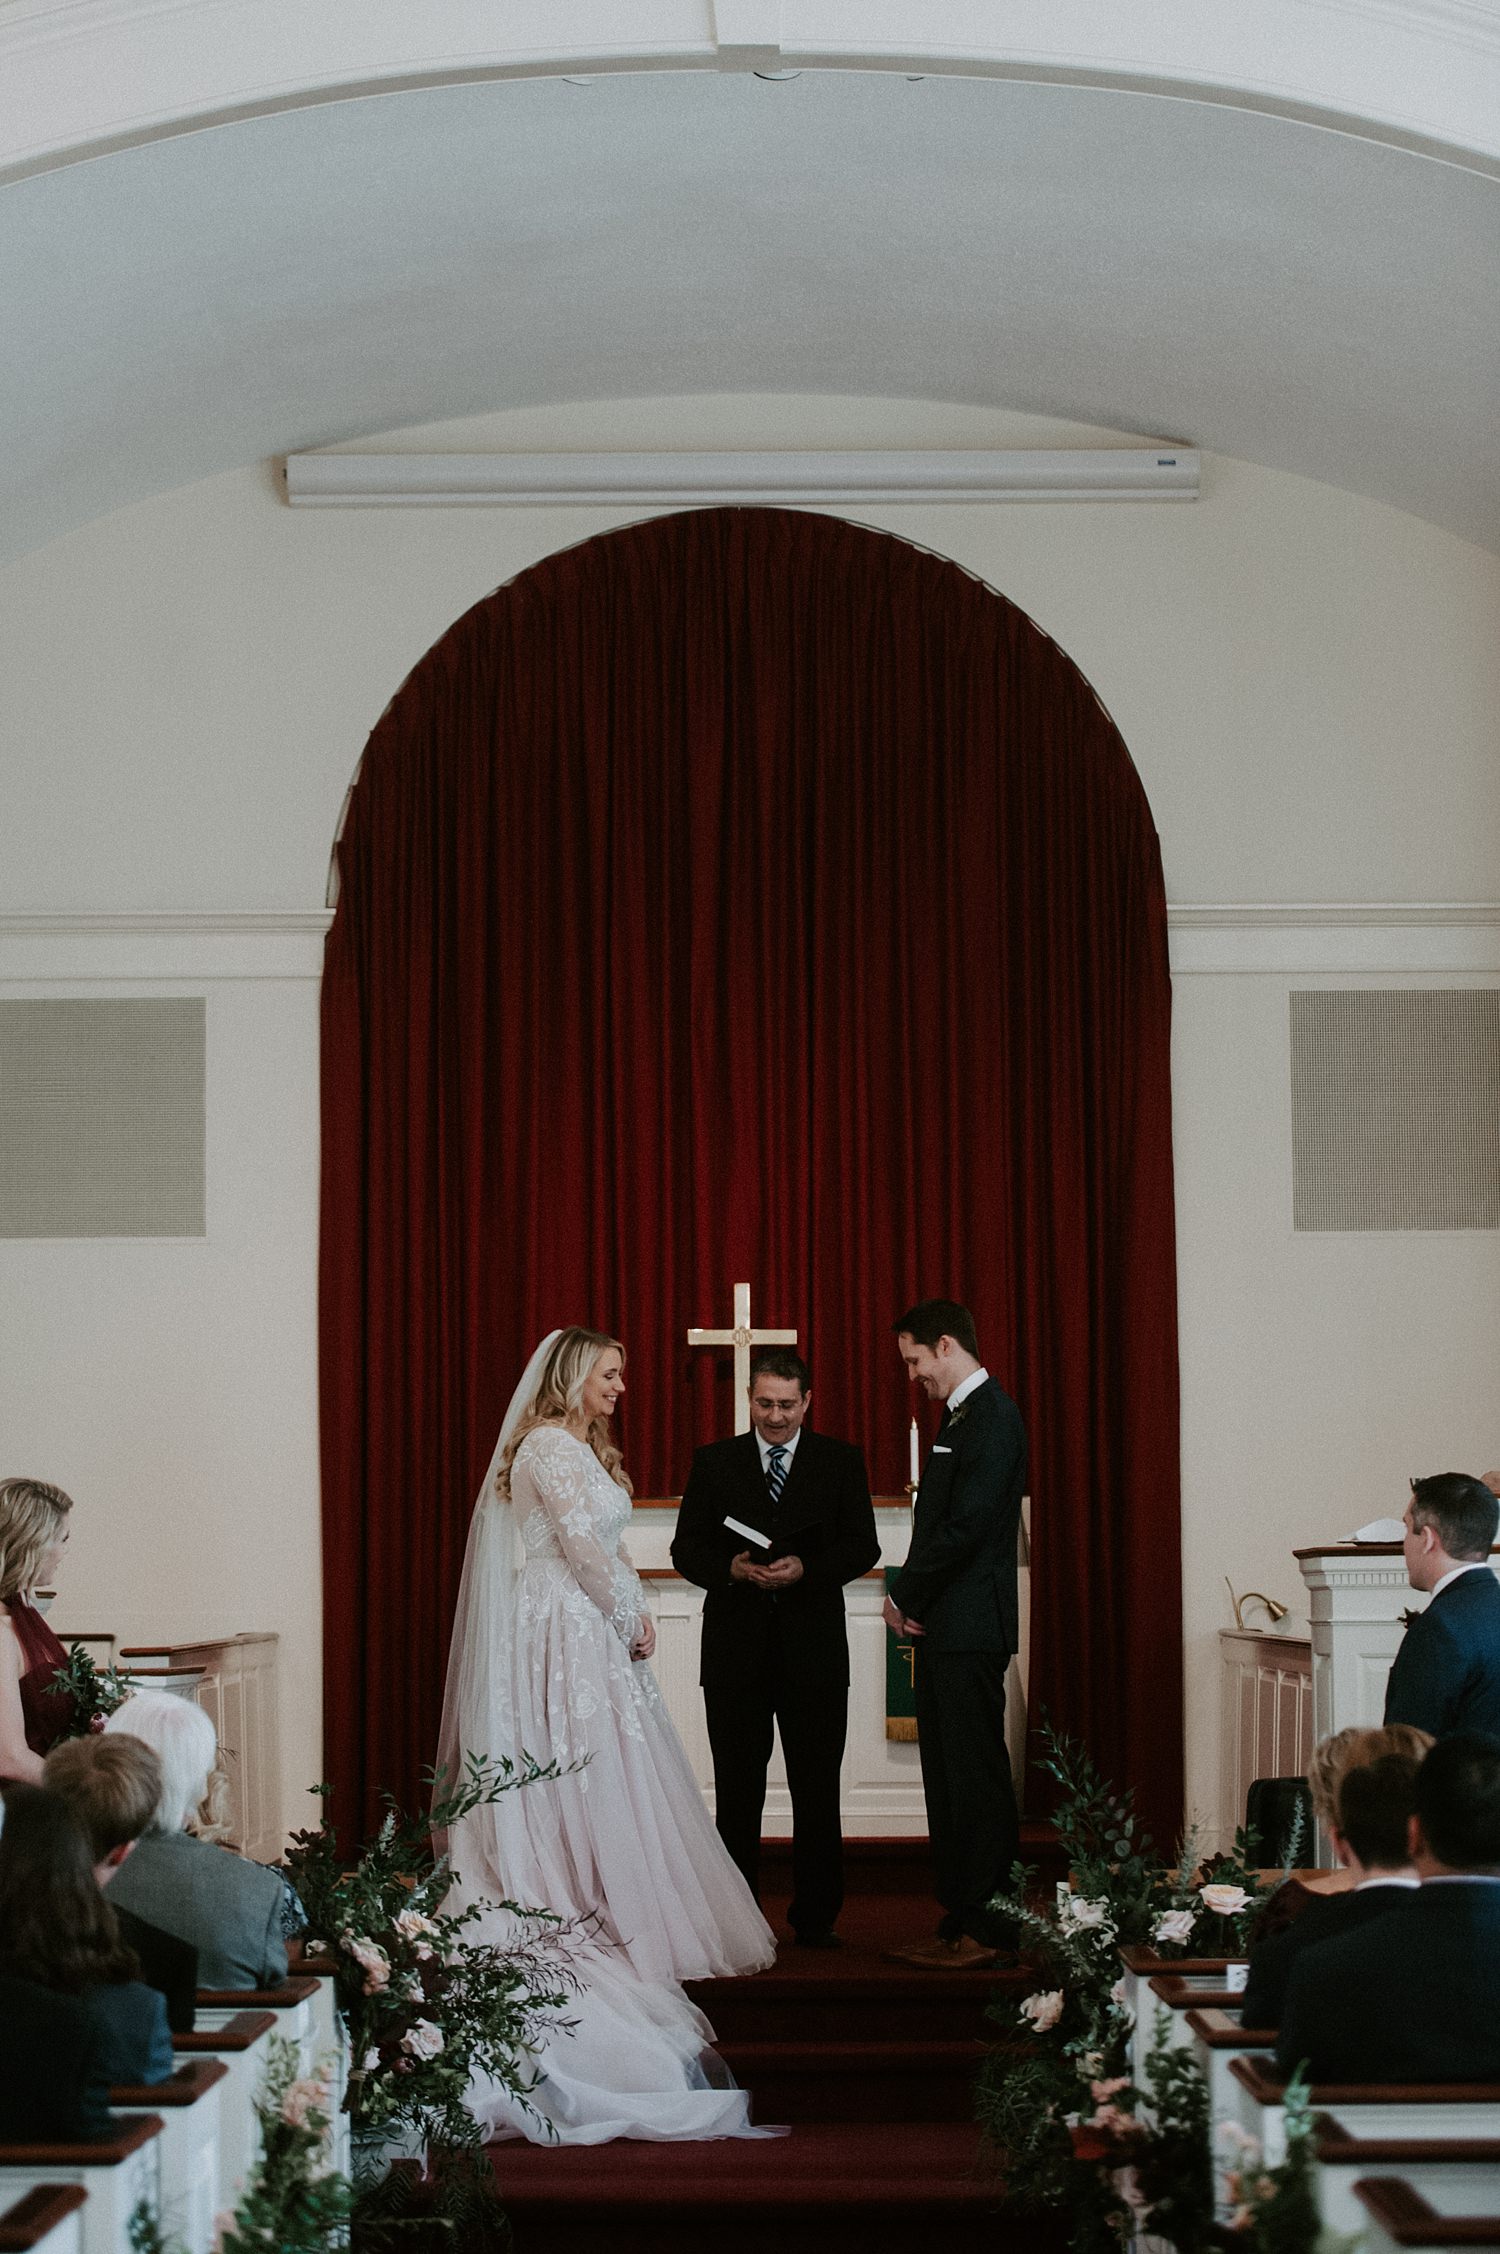 CT Church wedding ceremony in Wethersfield, CT